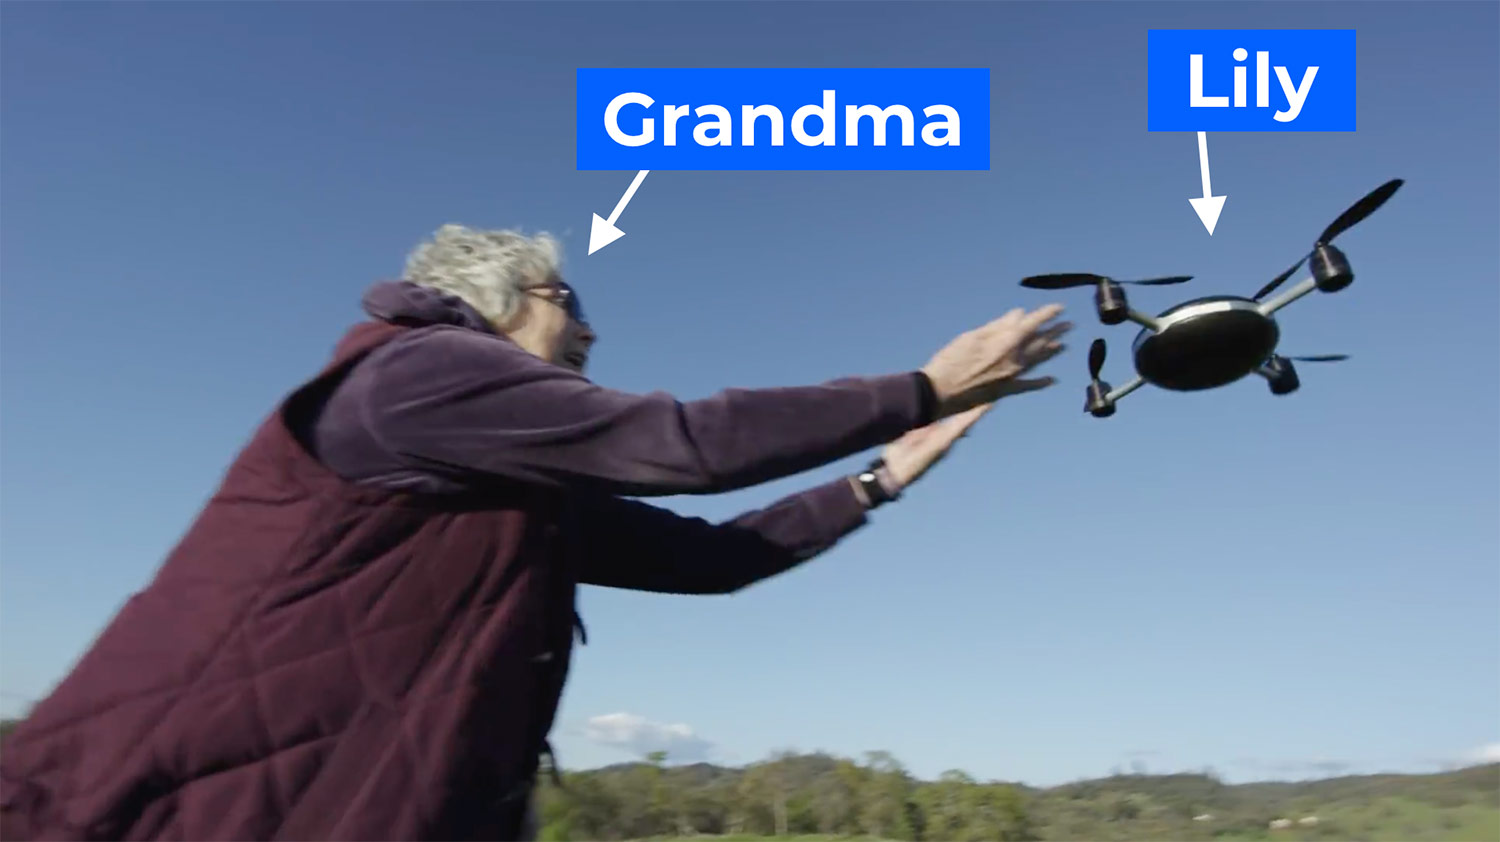 Lily Drone and Grandma